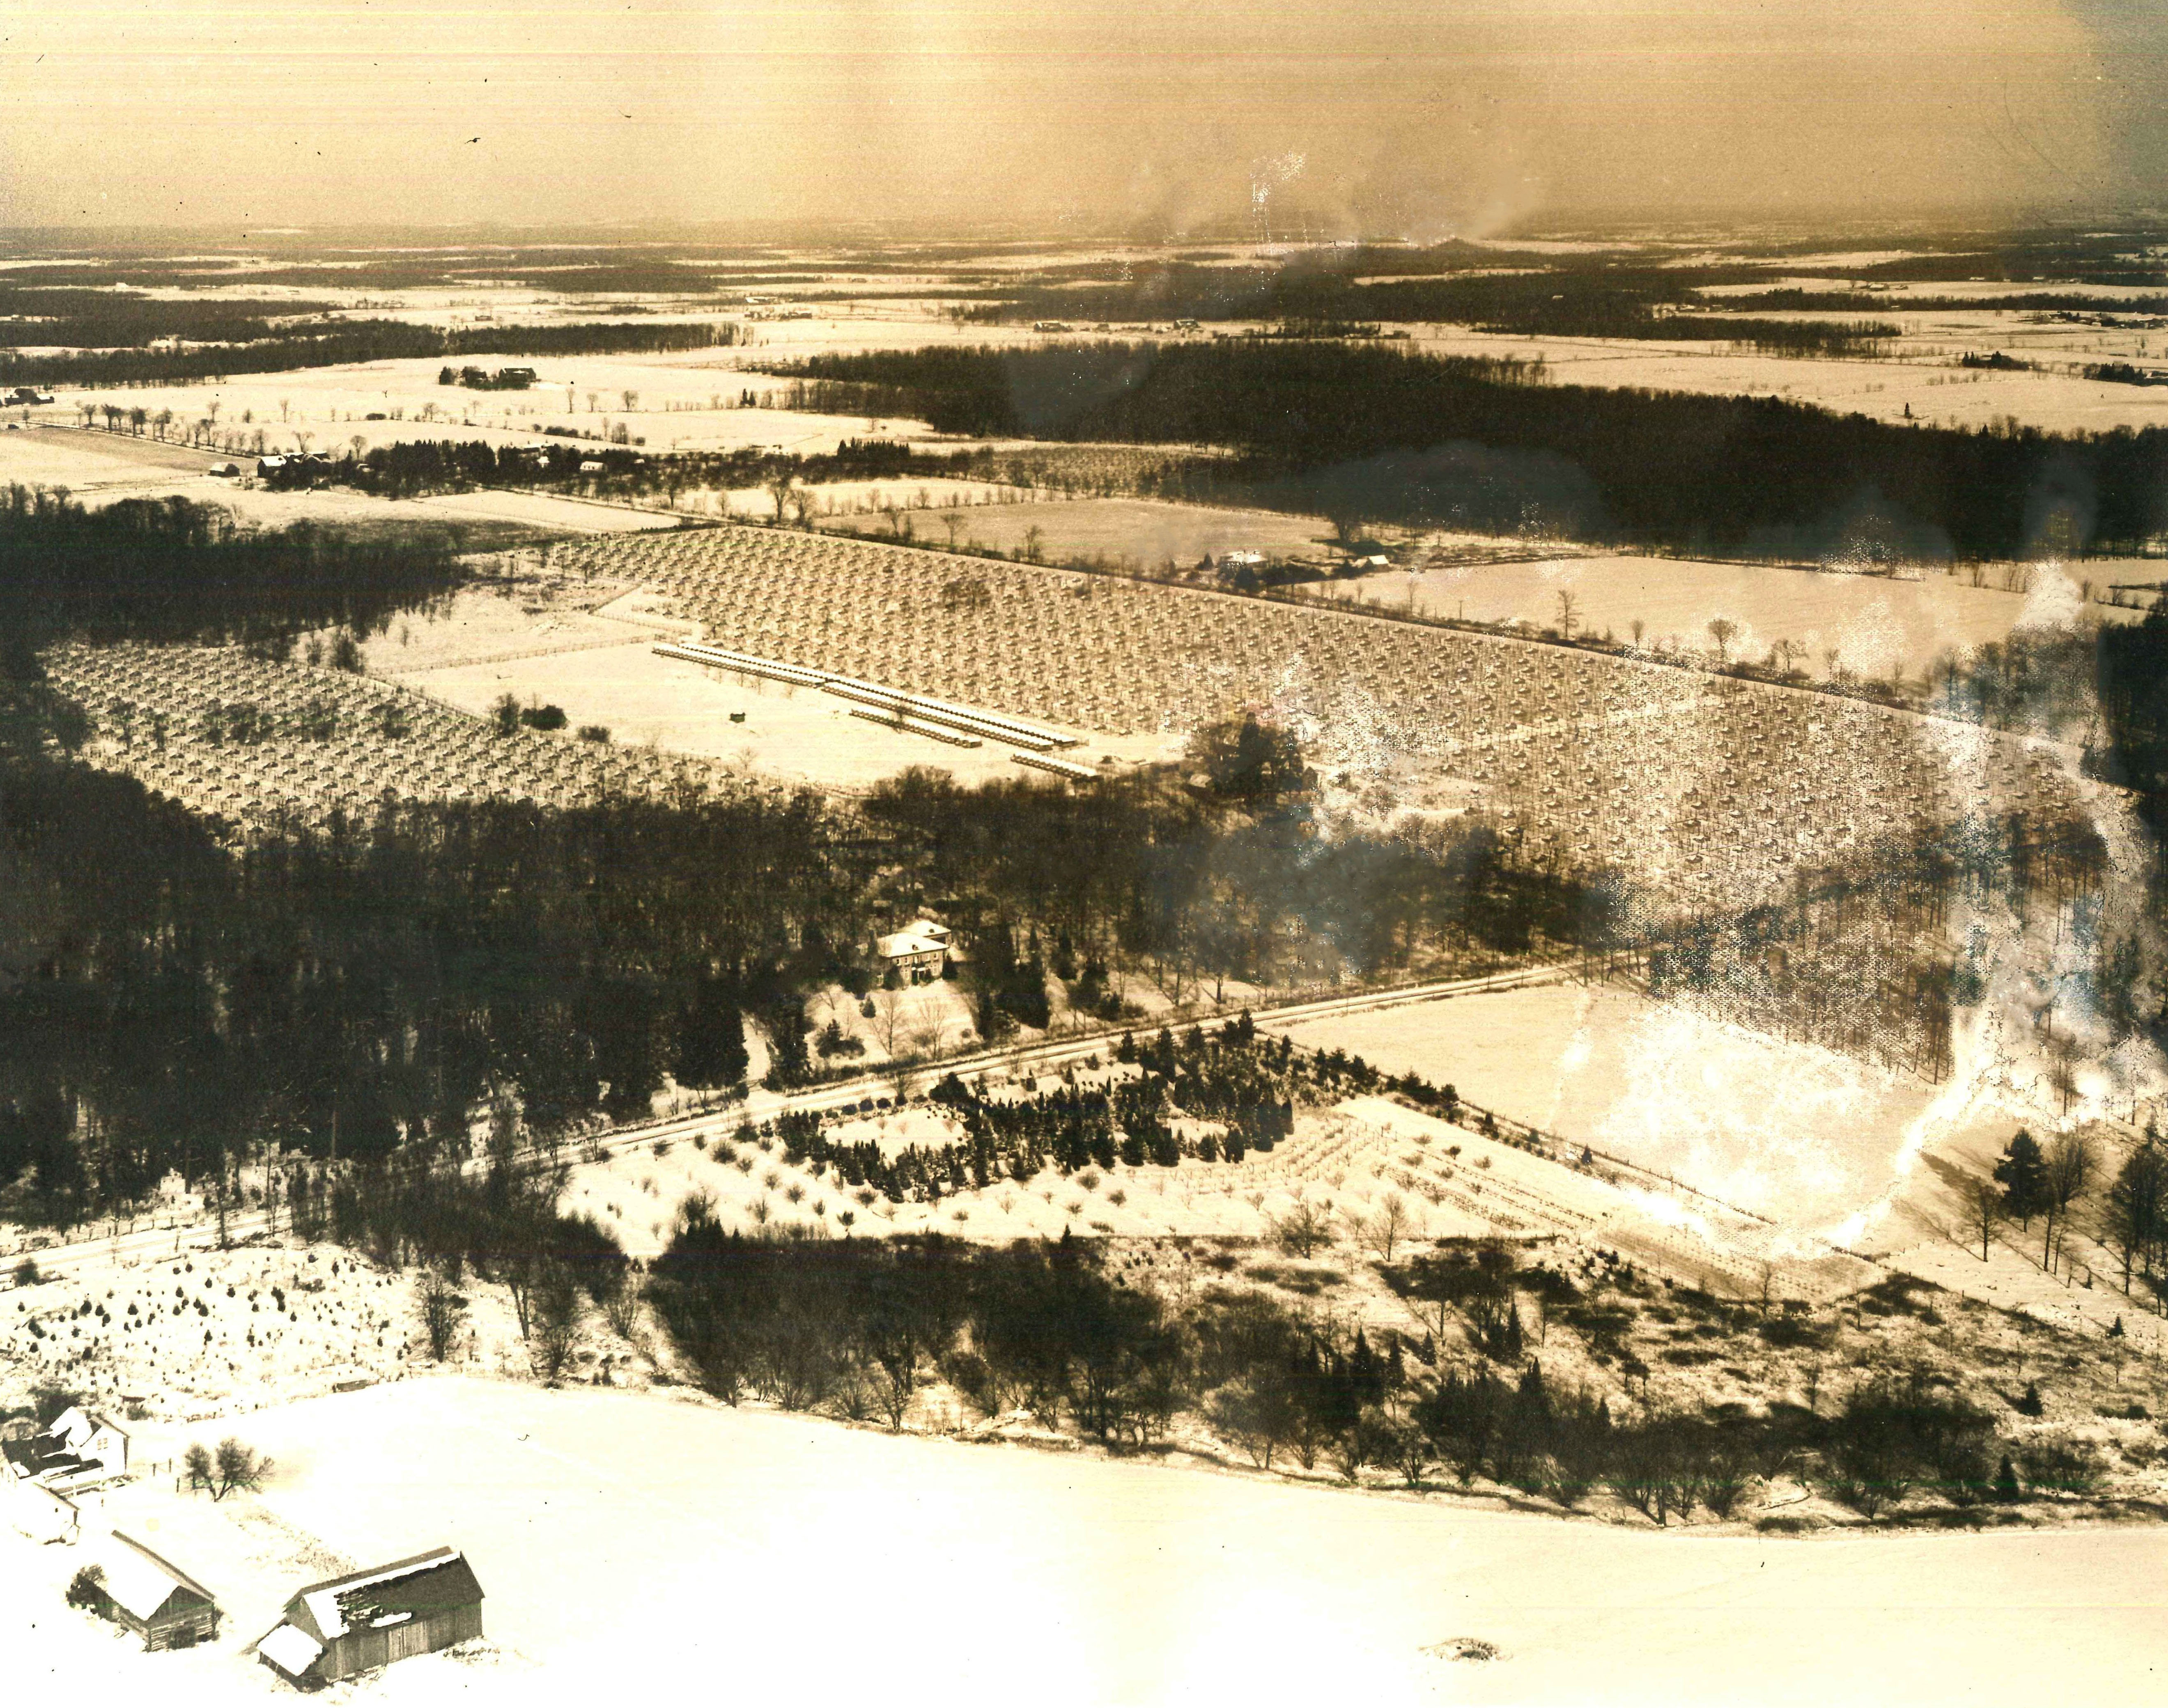 An aerial view of the Fromm fur and ginseng farm in Hamburg, Wisconsin. Date unknown. Photograph courtesy of the Marathon County Historical Society.